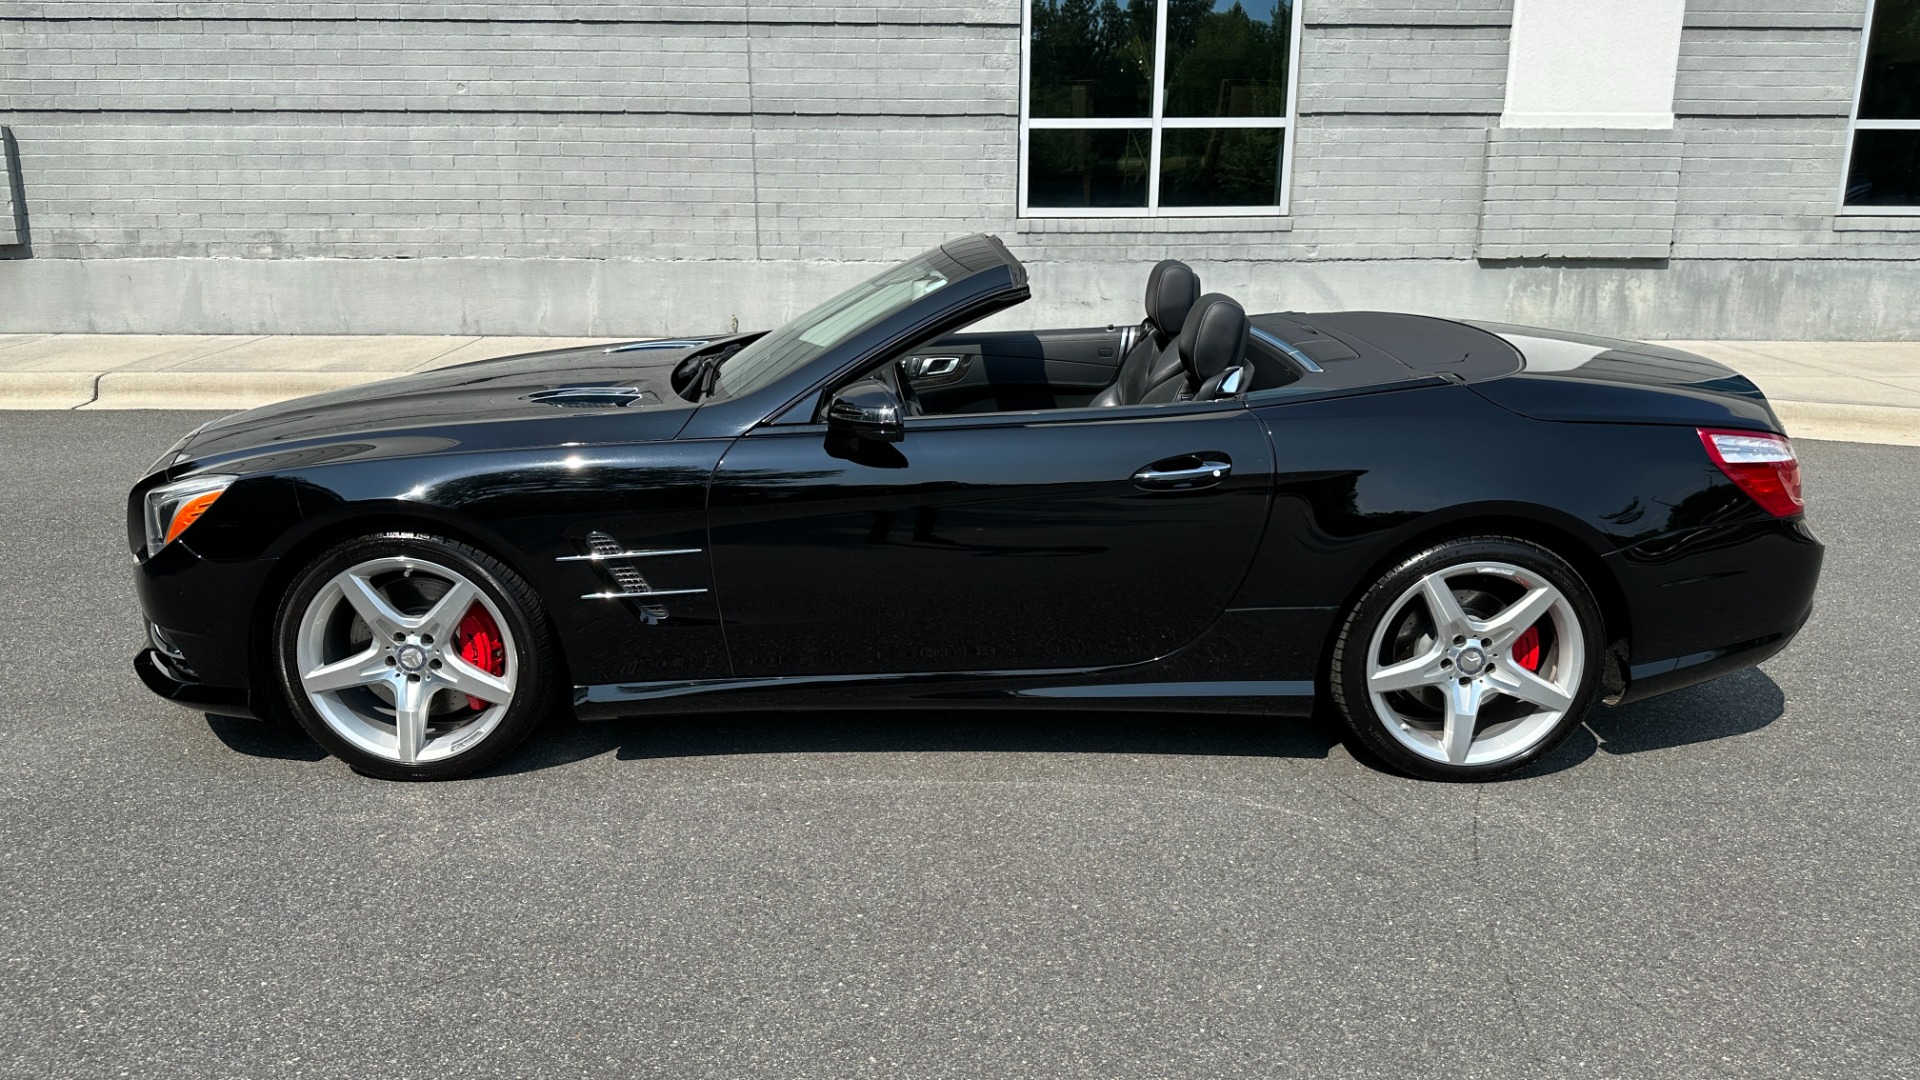 Used 2013 Mercedes-Benz SL-Class SL 550 / CONVERTIBLE / GLASS HARD TOP / NAV / V8 TURBO / RED BRAKES for sale $35,800 at Formula Imports in Charlotte NC 28227 3